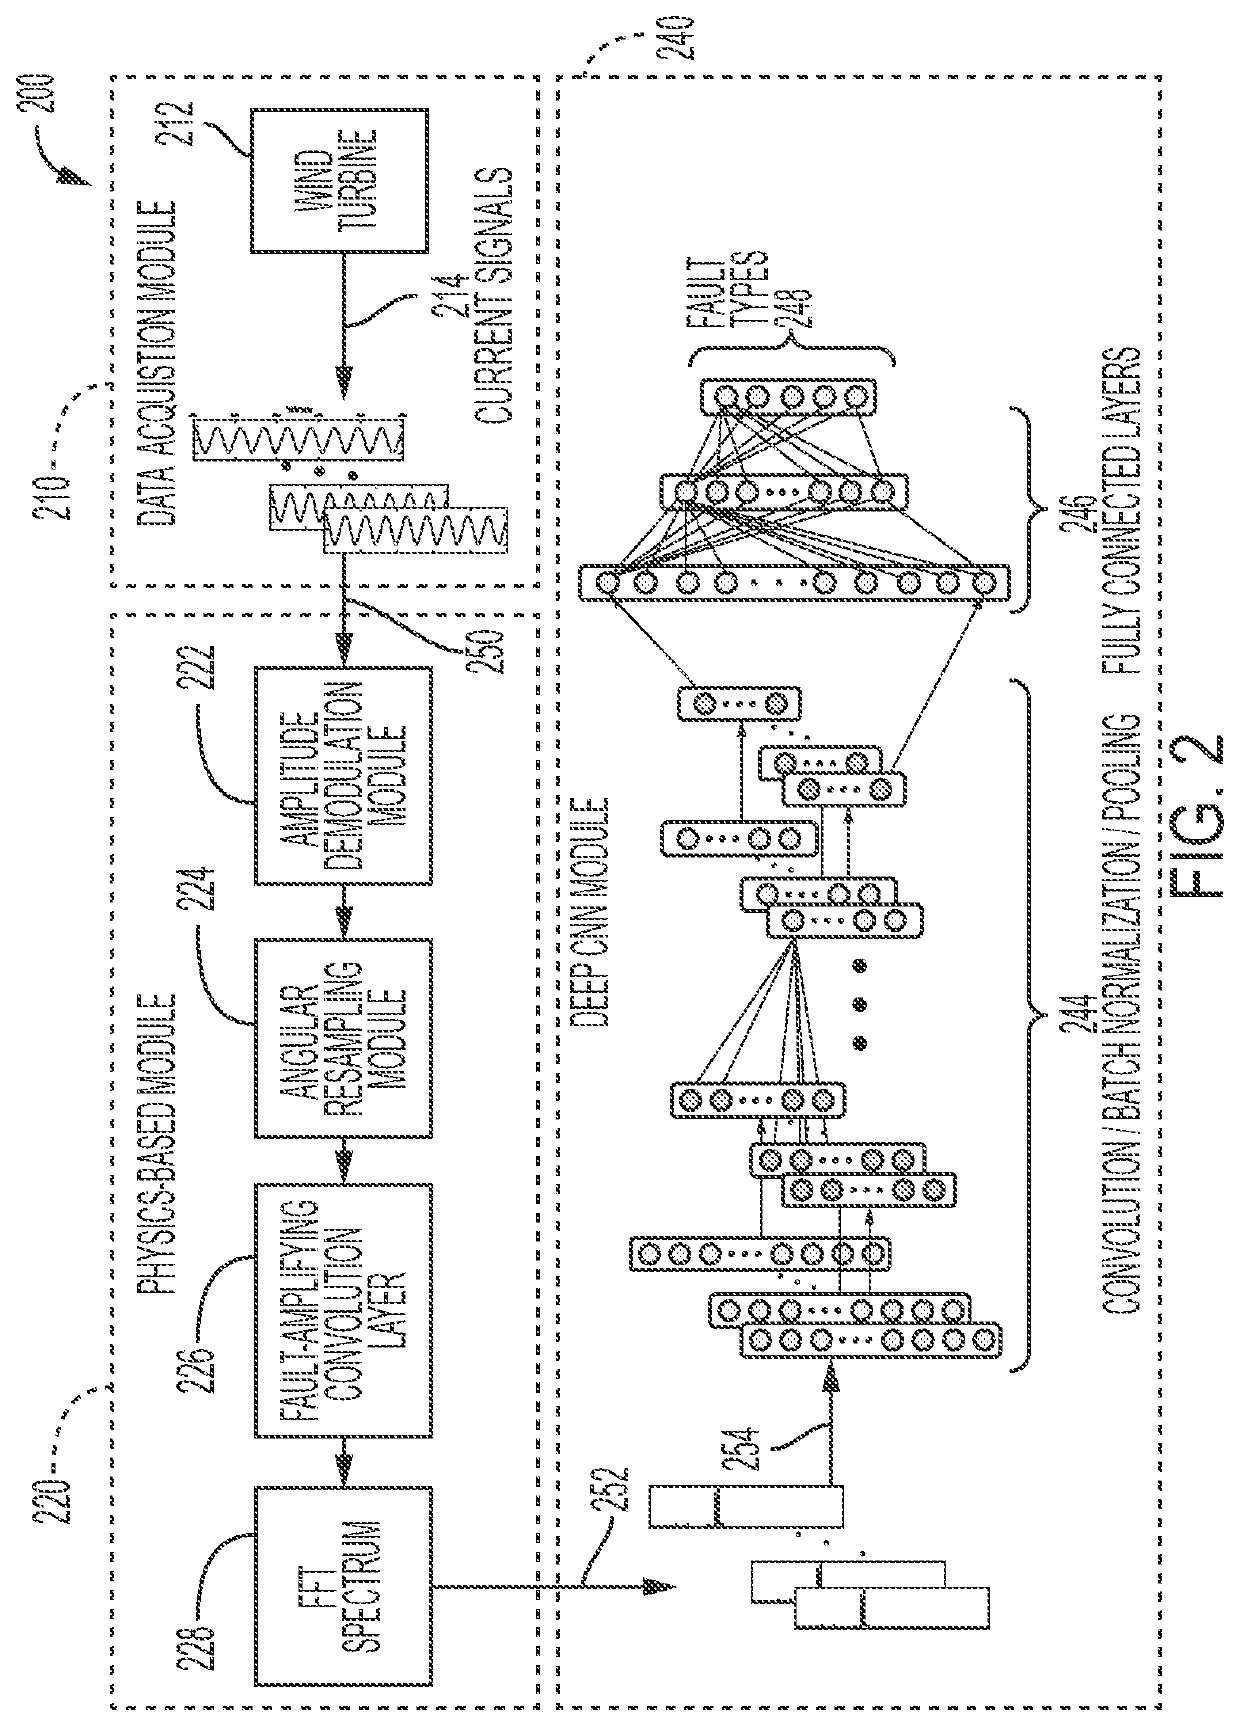 Deep hybrid convolutional neural network for fault diagnosis of wind turbine gearboxes